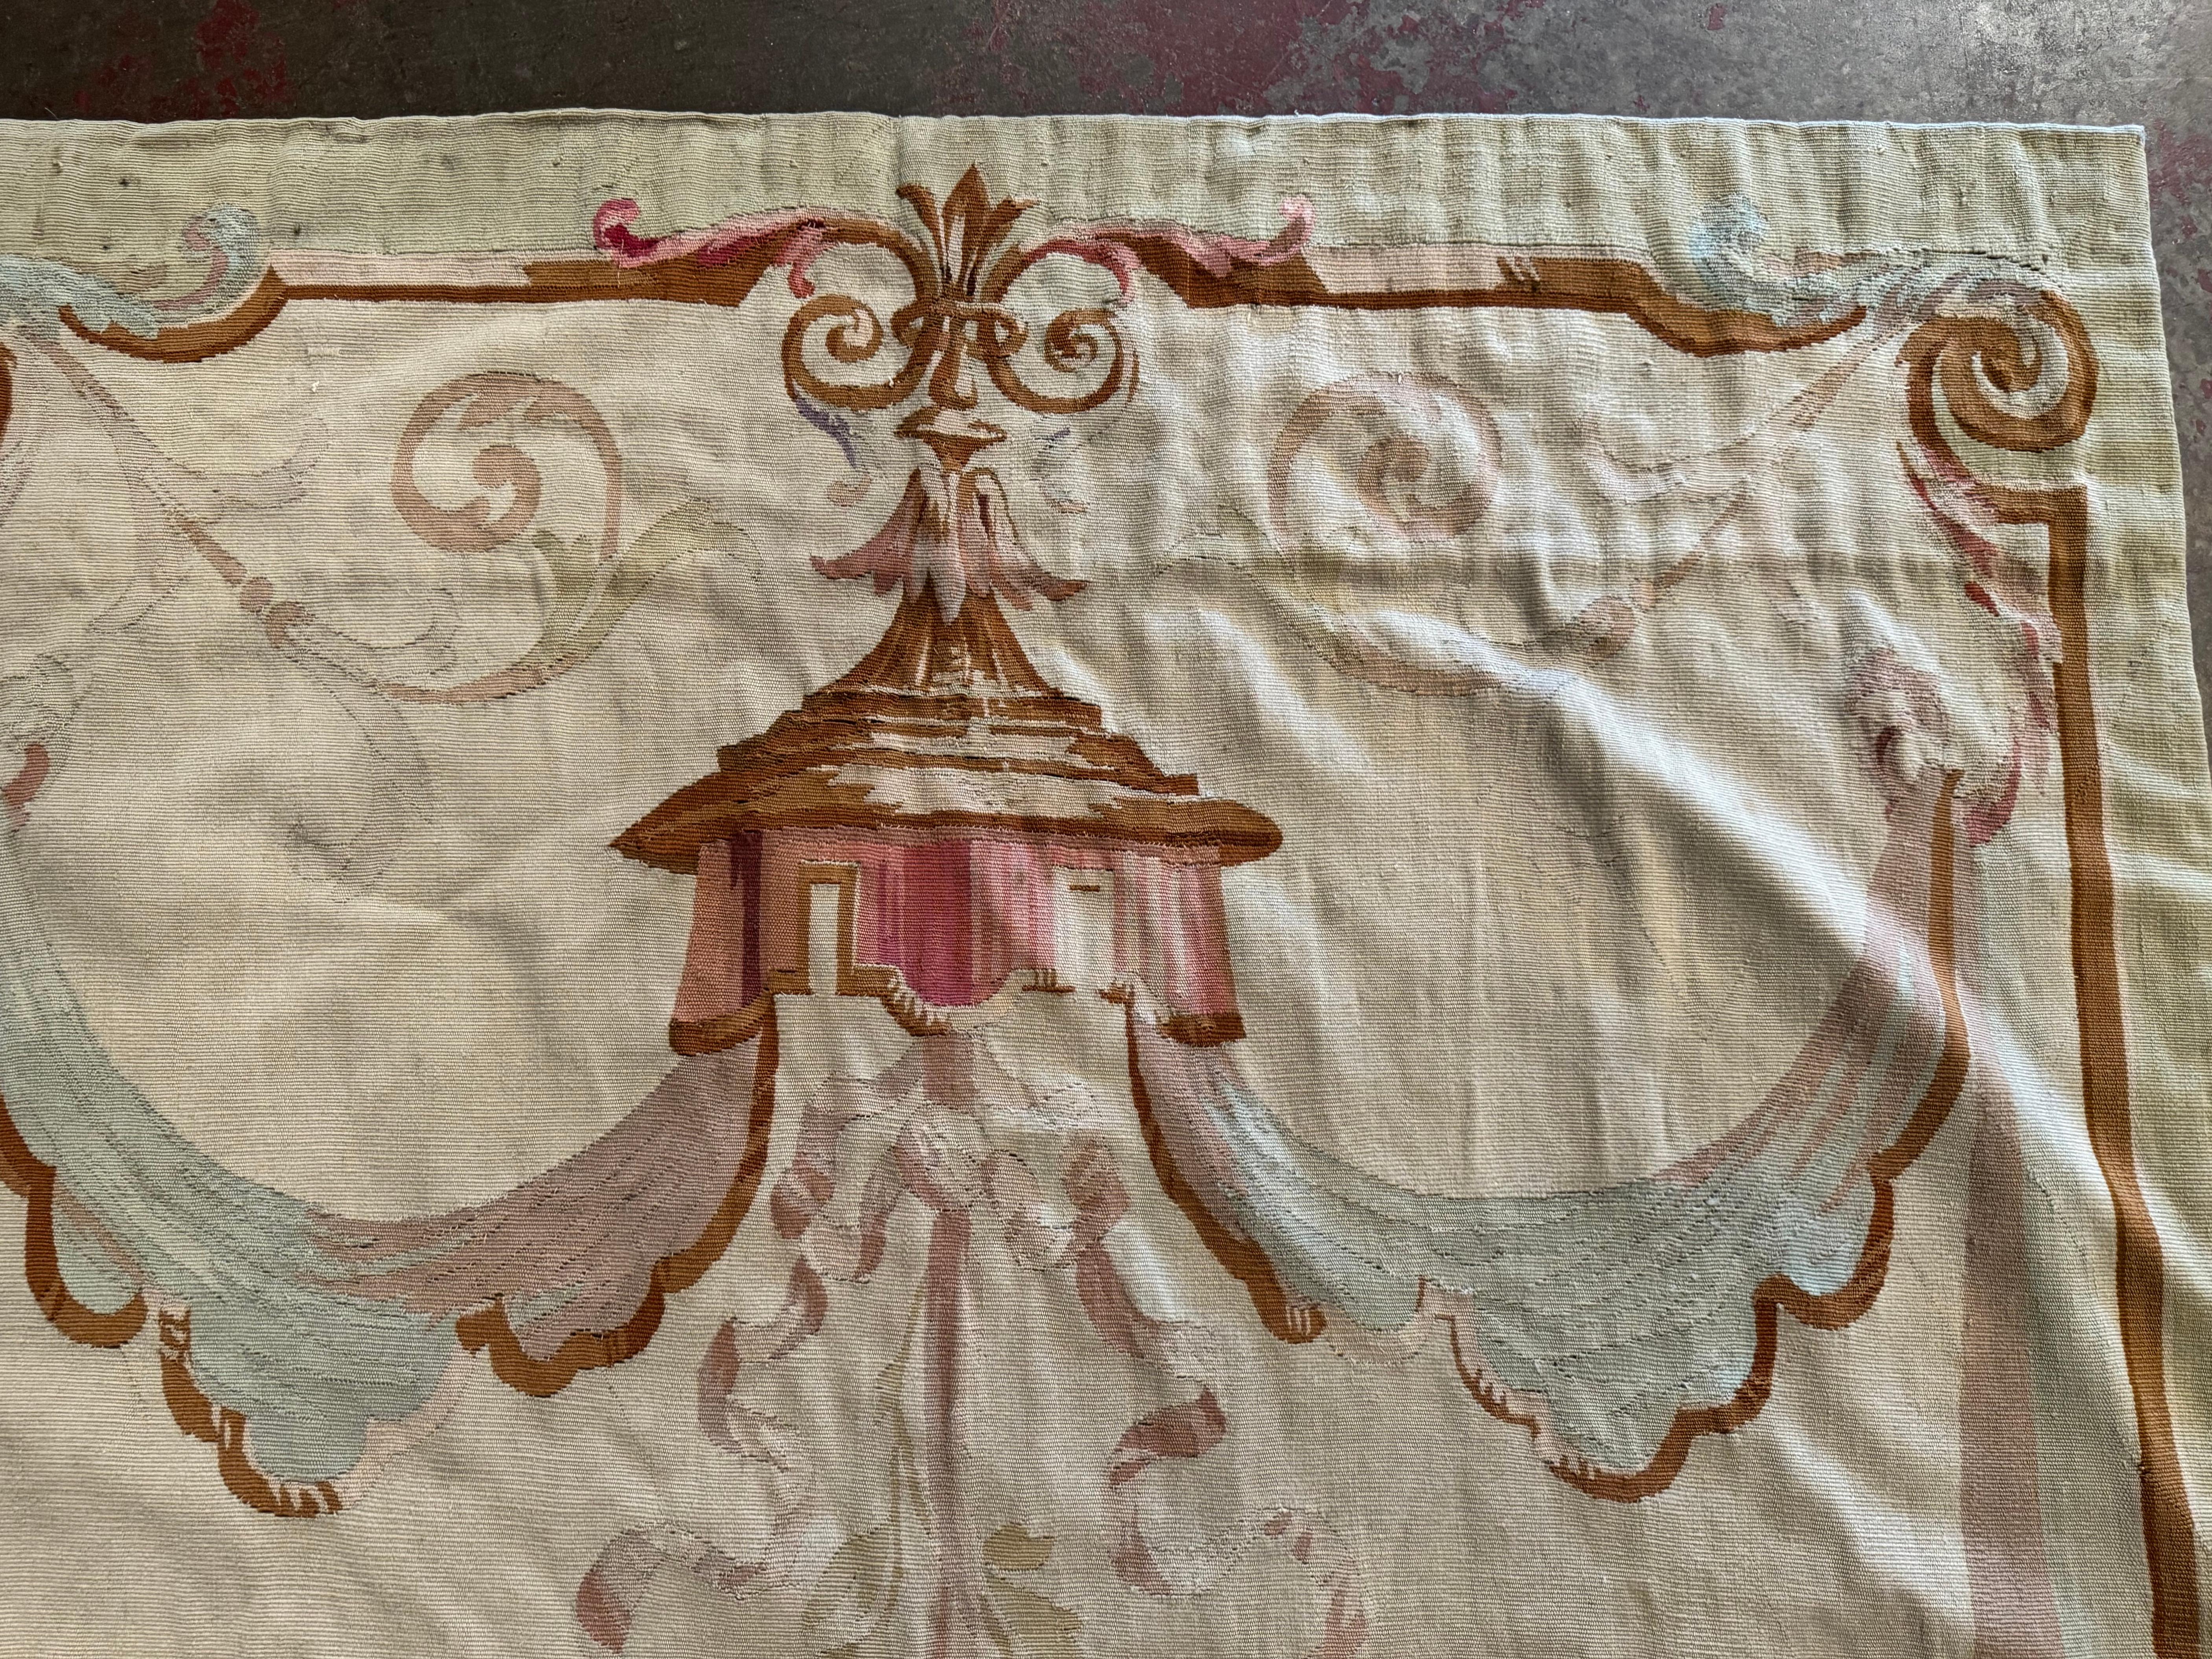 Pair of Mid-19th Century French Handwoven Floral Aubusson Wall Hanging Portieres For Sale 1